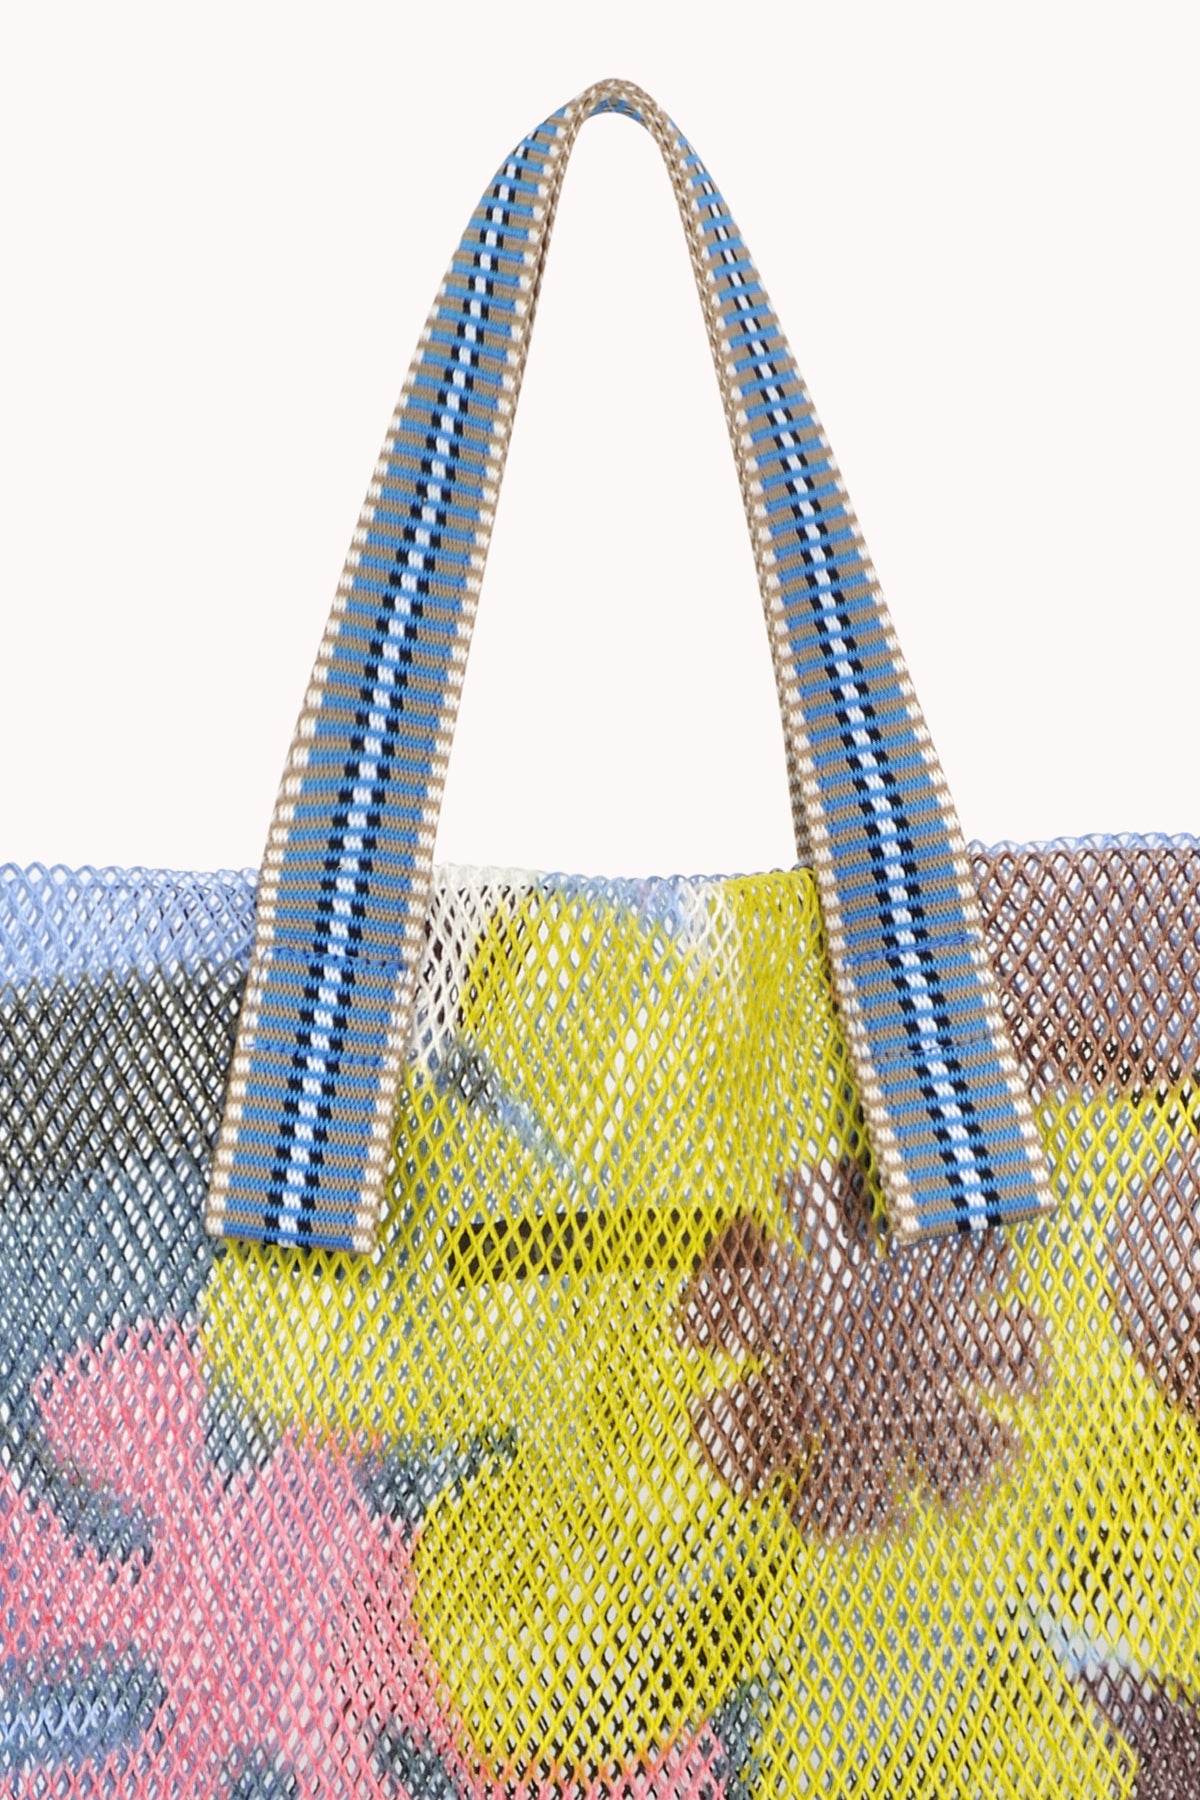 Handle detail on small mesh tote in blue with multi colored flowers.-24508064235713